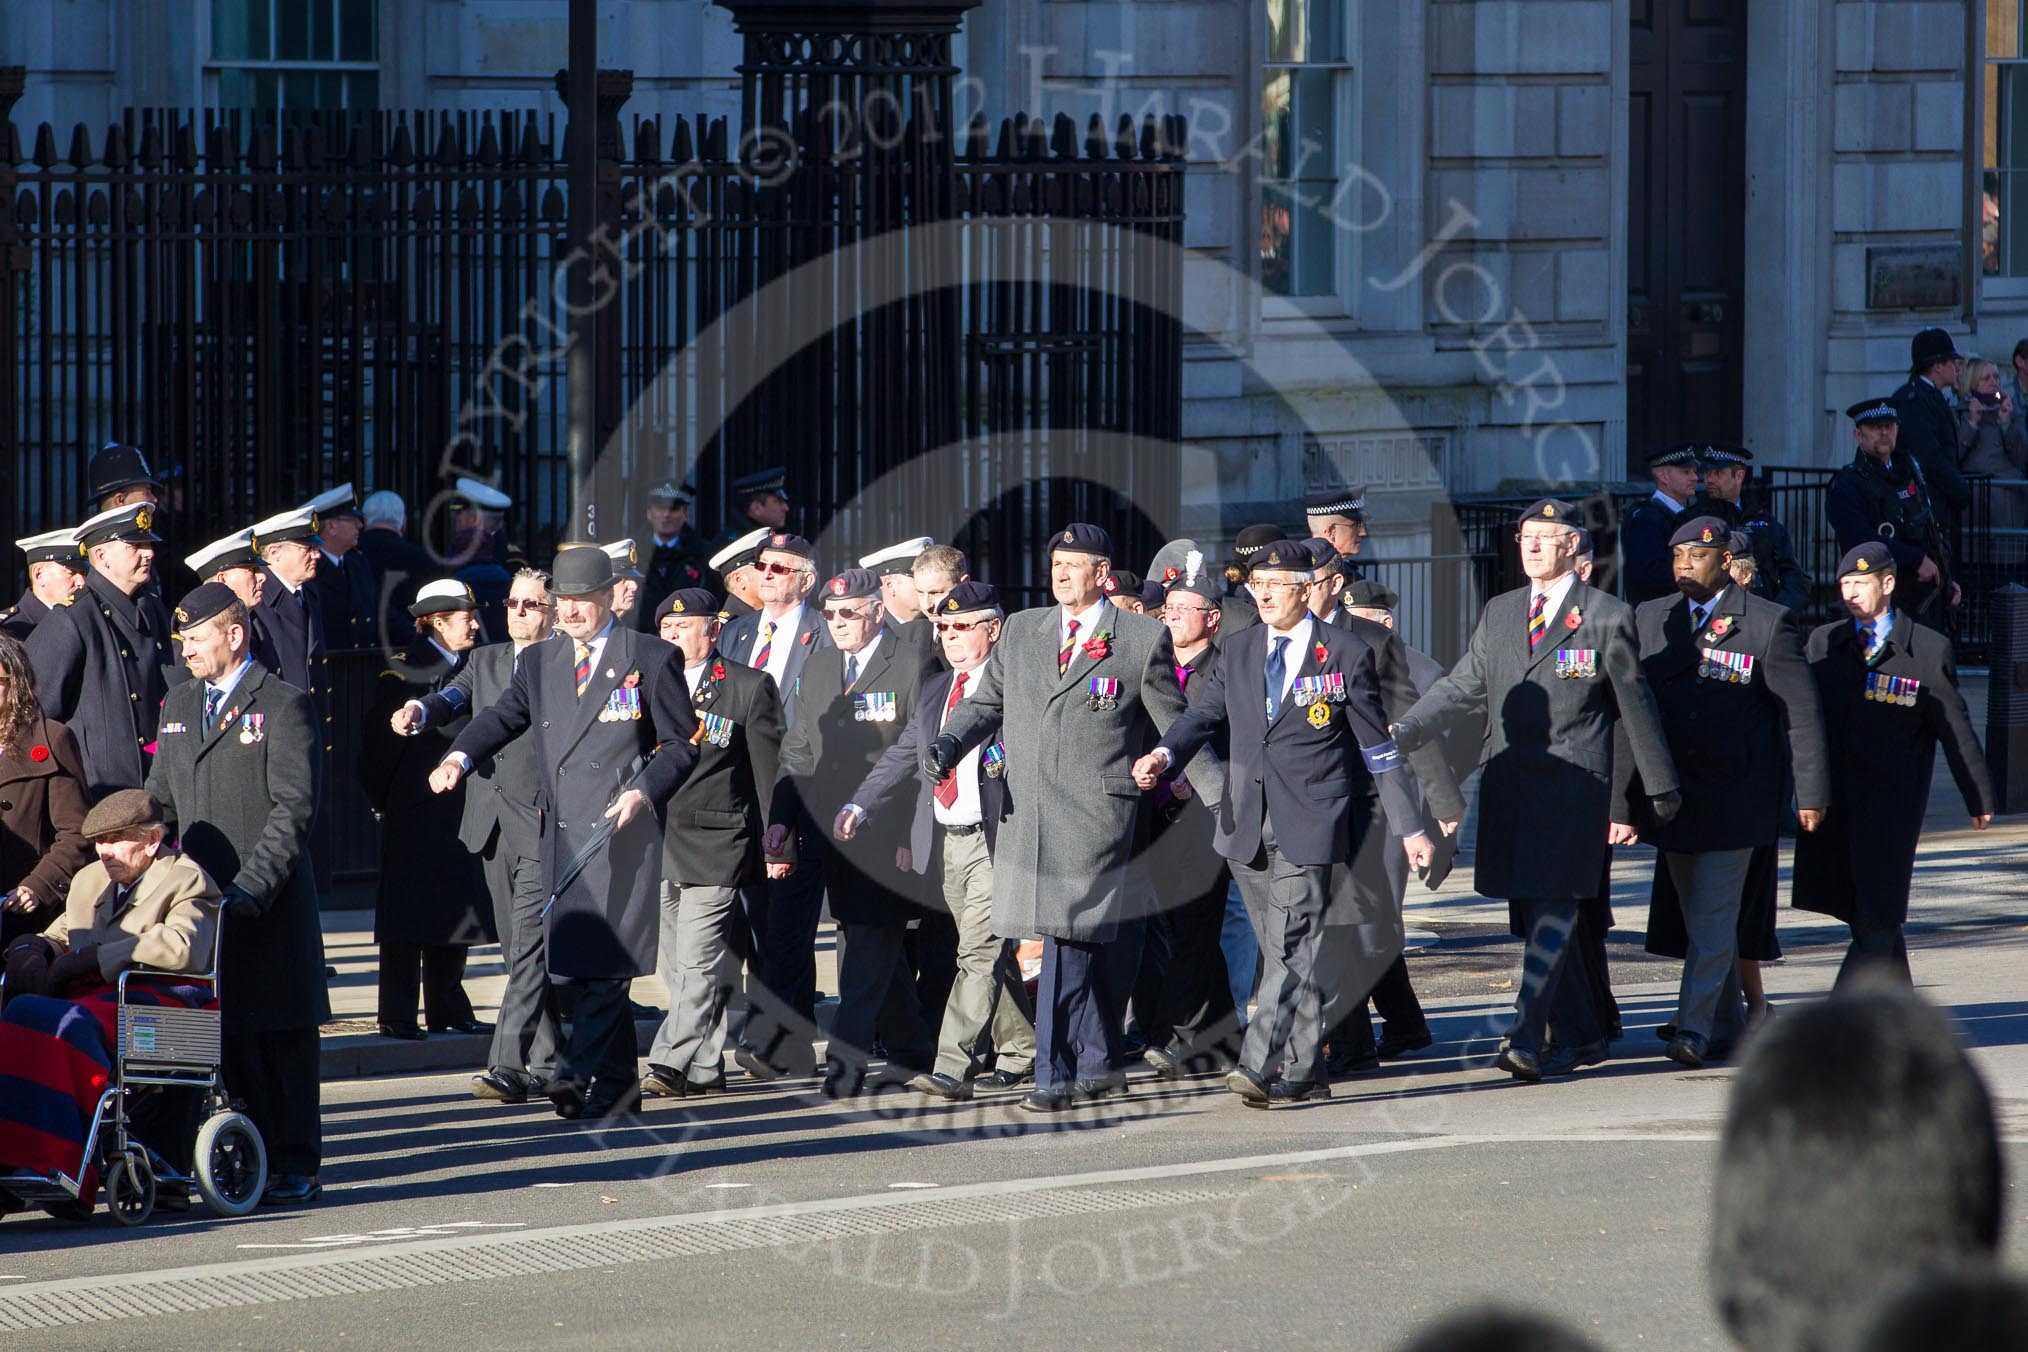 Remembrance Sunday 2012 Cenotaph March Past: Group C1, Blind Veterans UK and B1, Royal Army Medical Corps Association..
Whitehall, Cenotaph,
London SW1,

United Kingdom,
on 11 November 2012 at 11:54, image #803